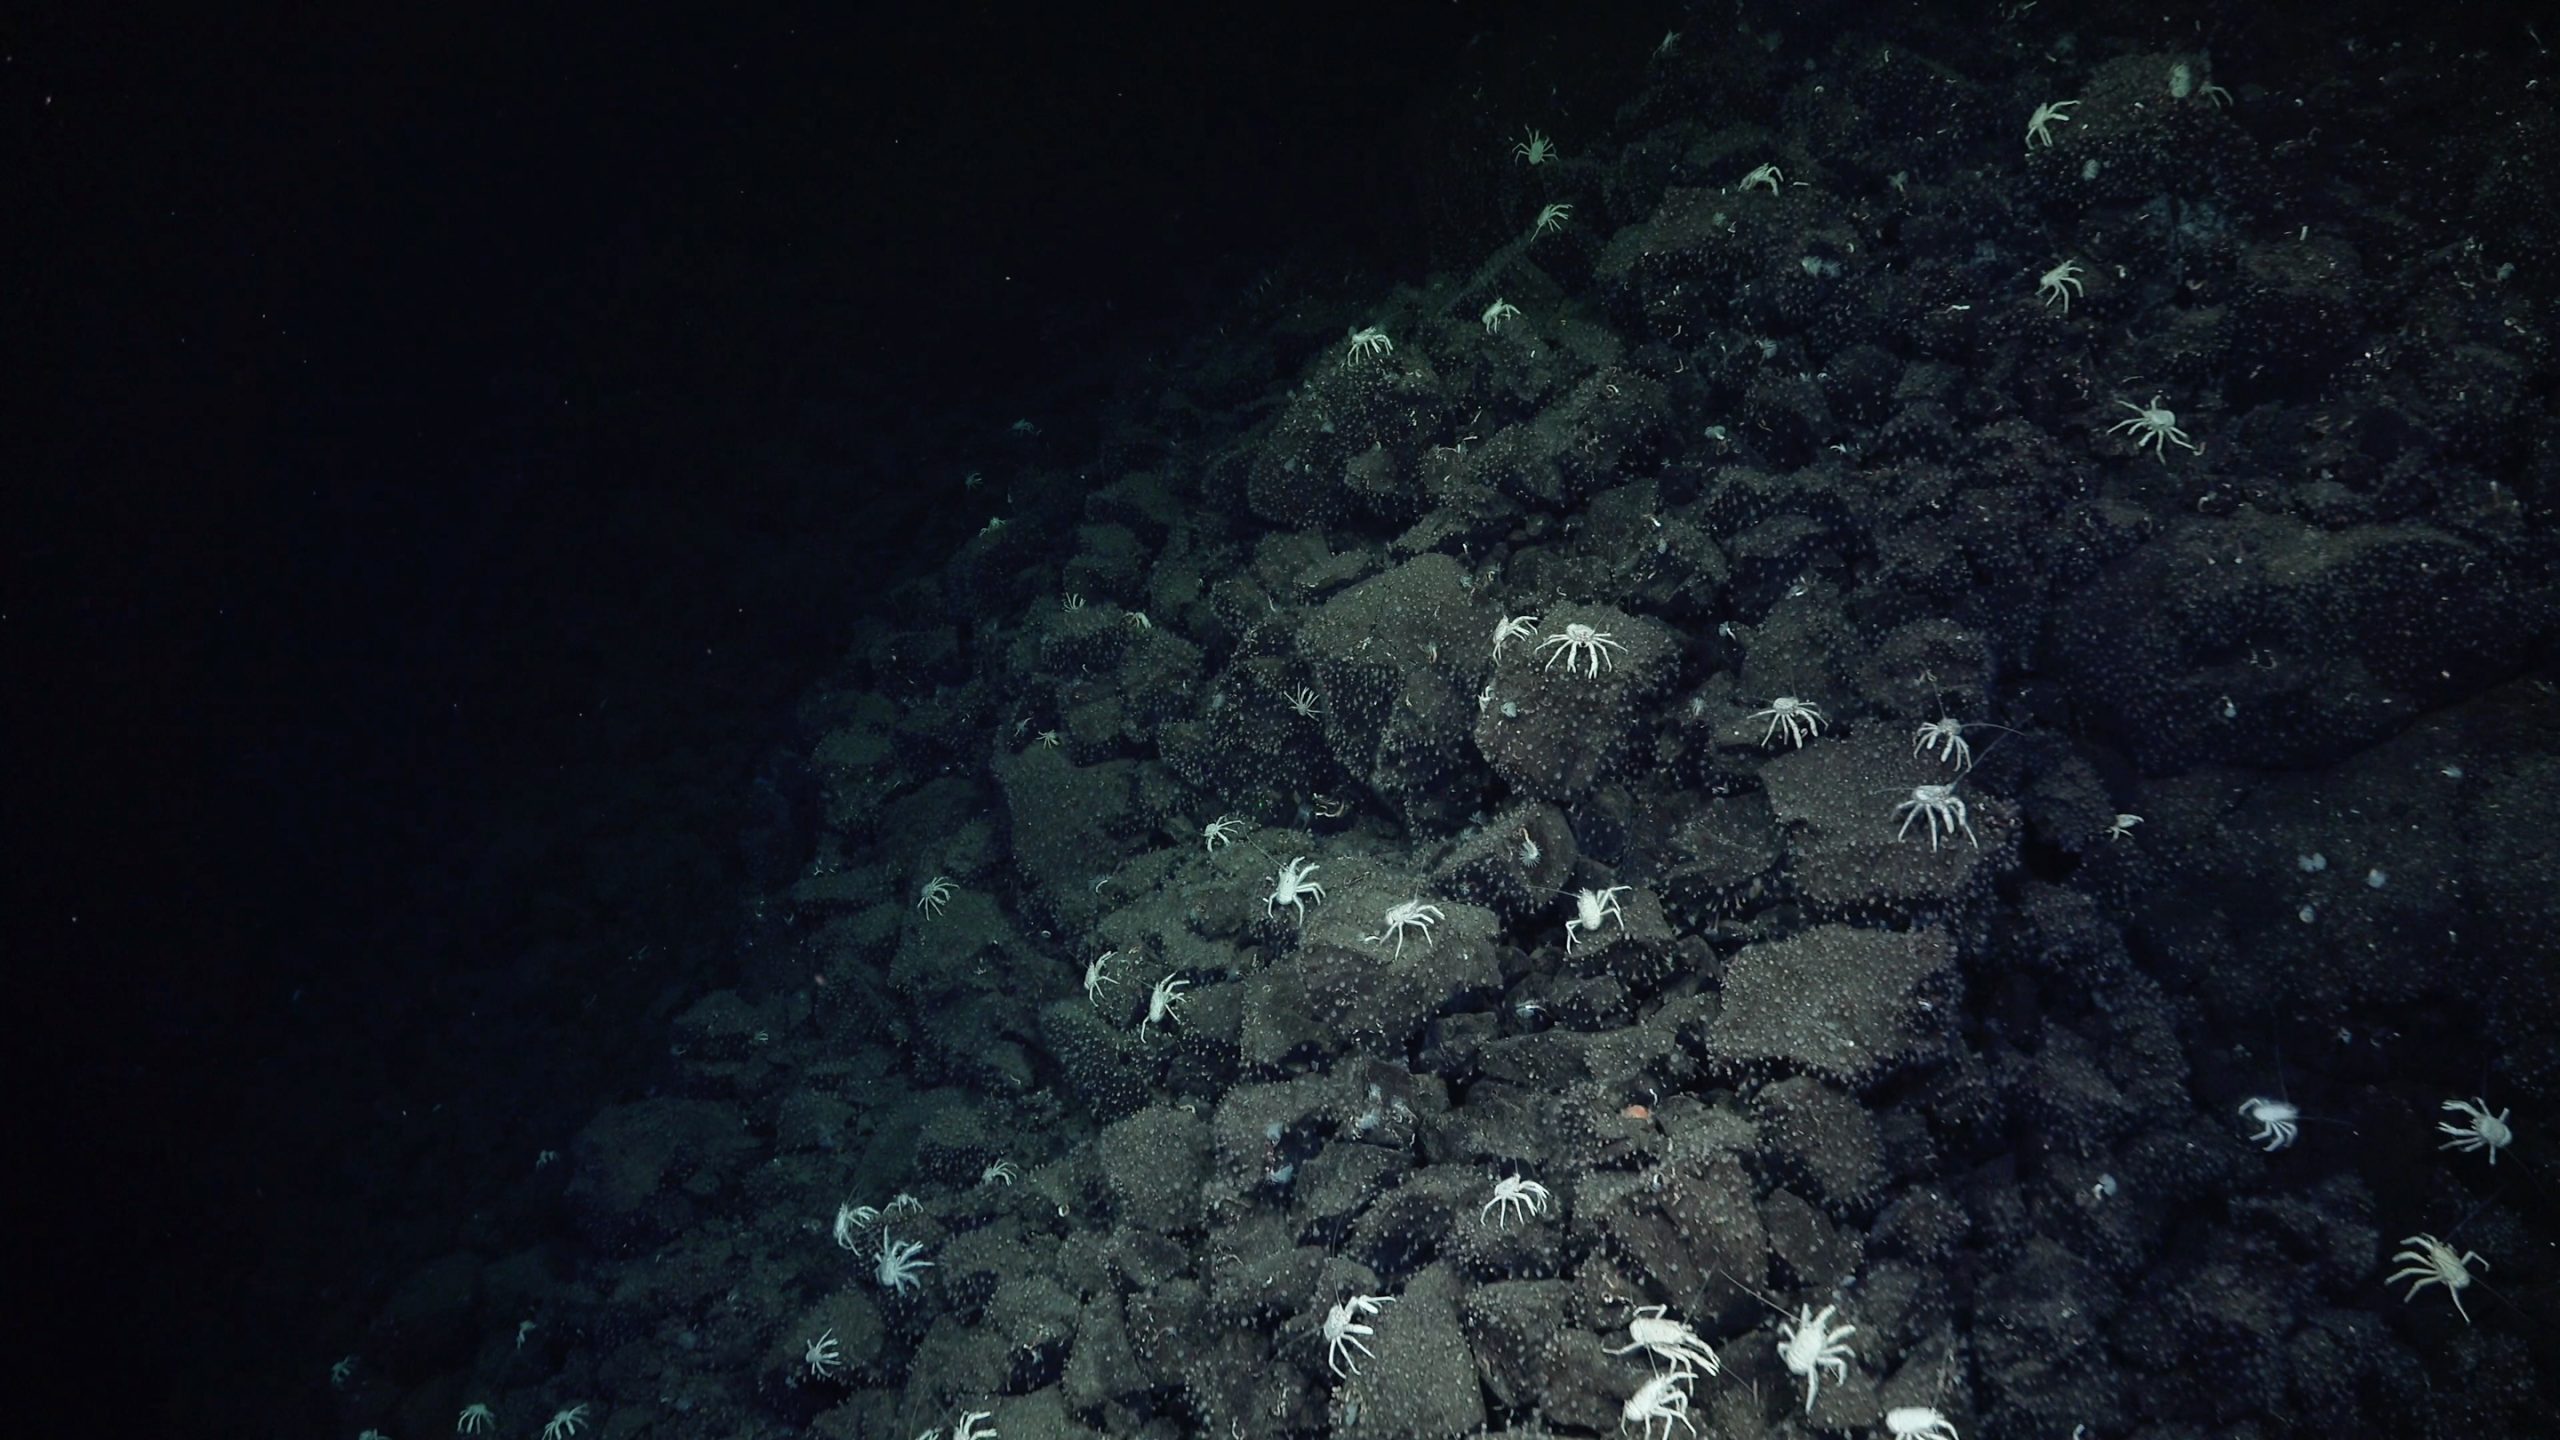 Scientists from the Schmidt Ocean Institute trace the "Sendero del Cangrejo" or "Trail of the Crabs" hydrothermal vent in the Galapagos.